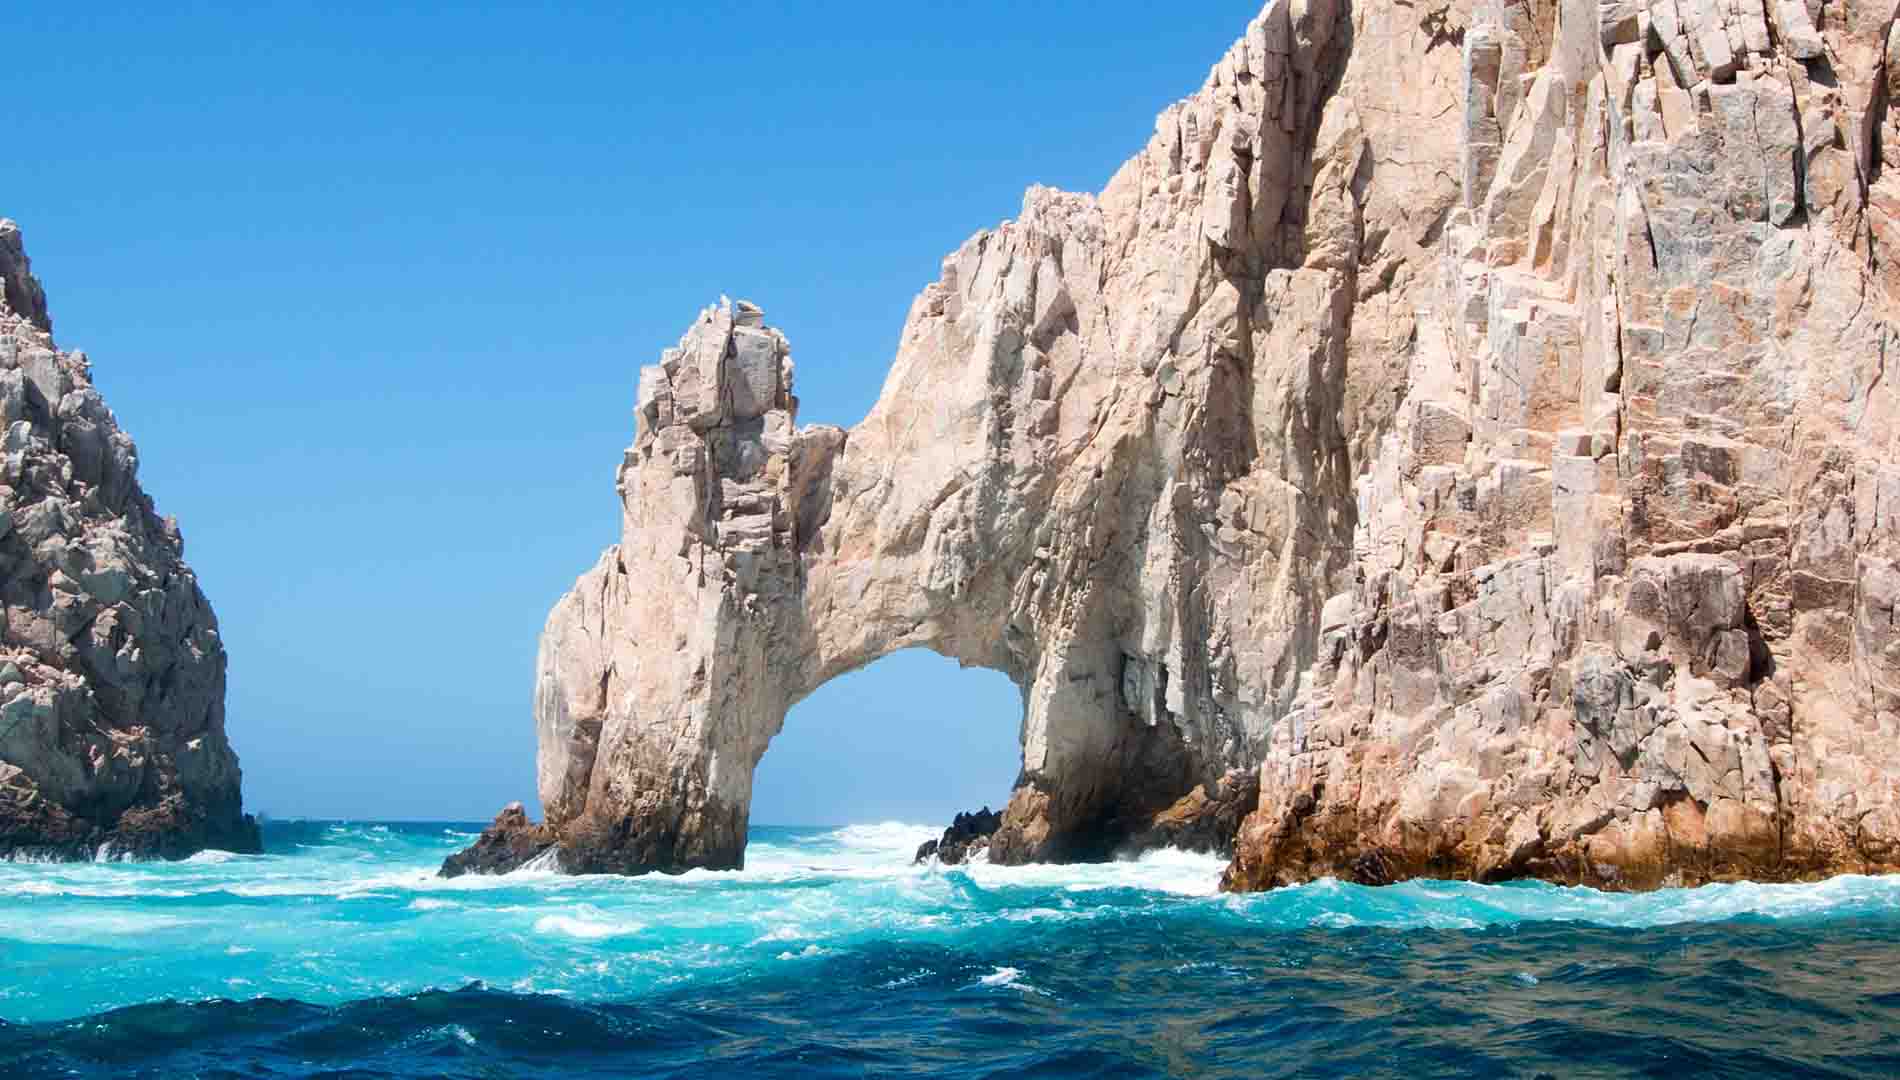 Main Image at Cabos Best Tours